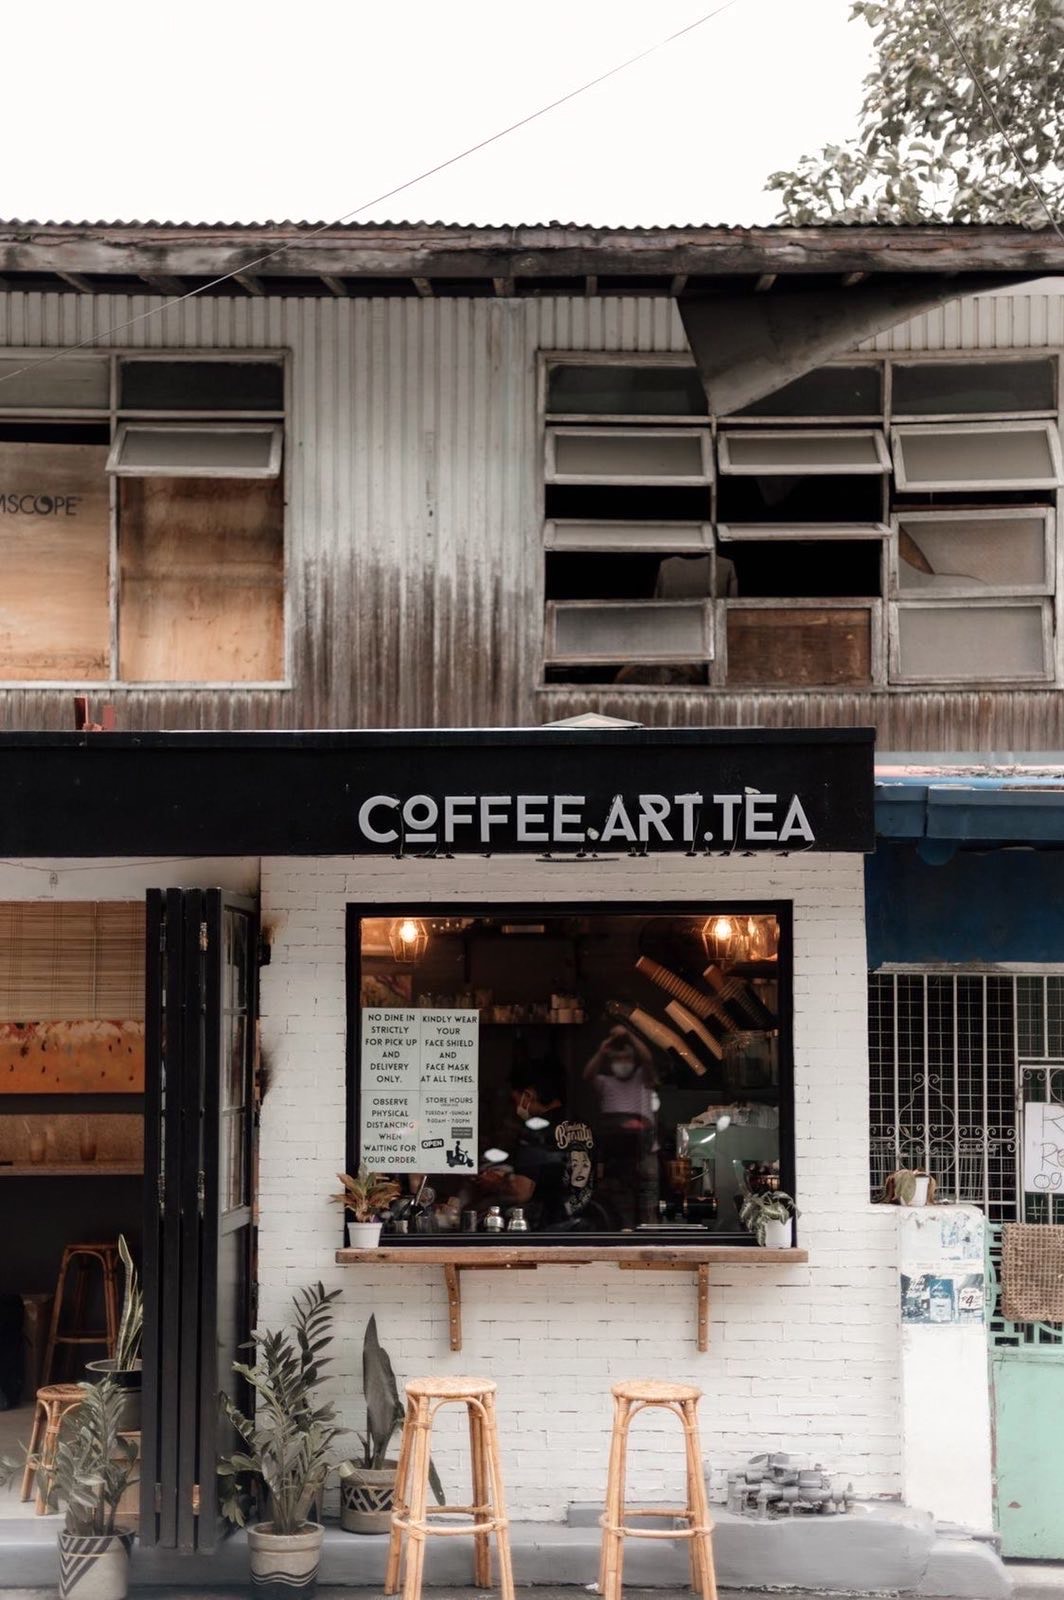 At any given time, restrictions permit Coffee Artea to house 10 customers—four inside and six outside